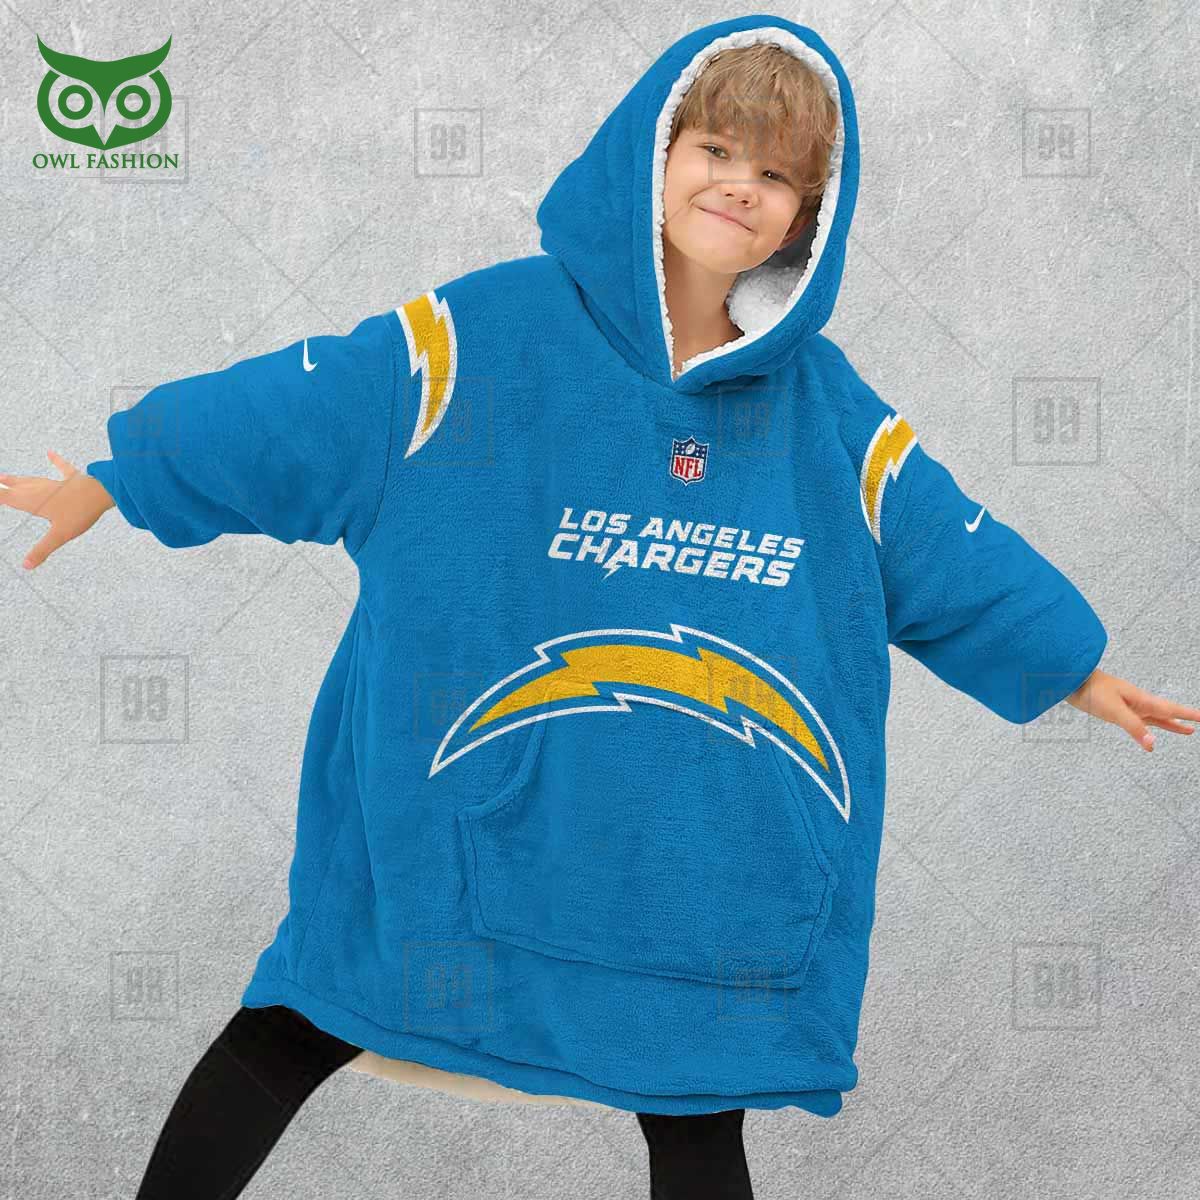 los angeles chargers american league nfl customized snuggie hoodie 4 cbOD4